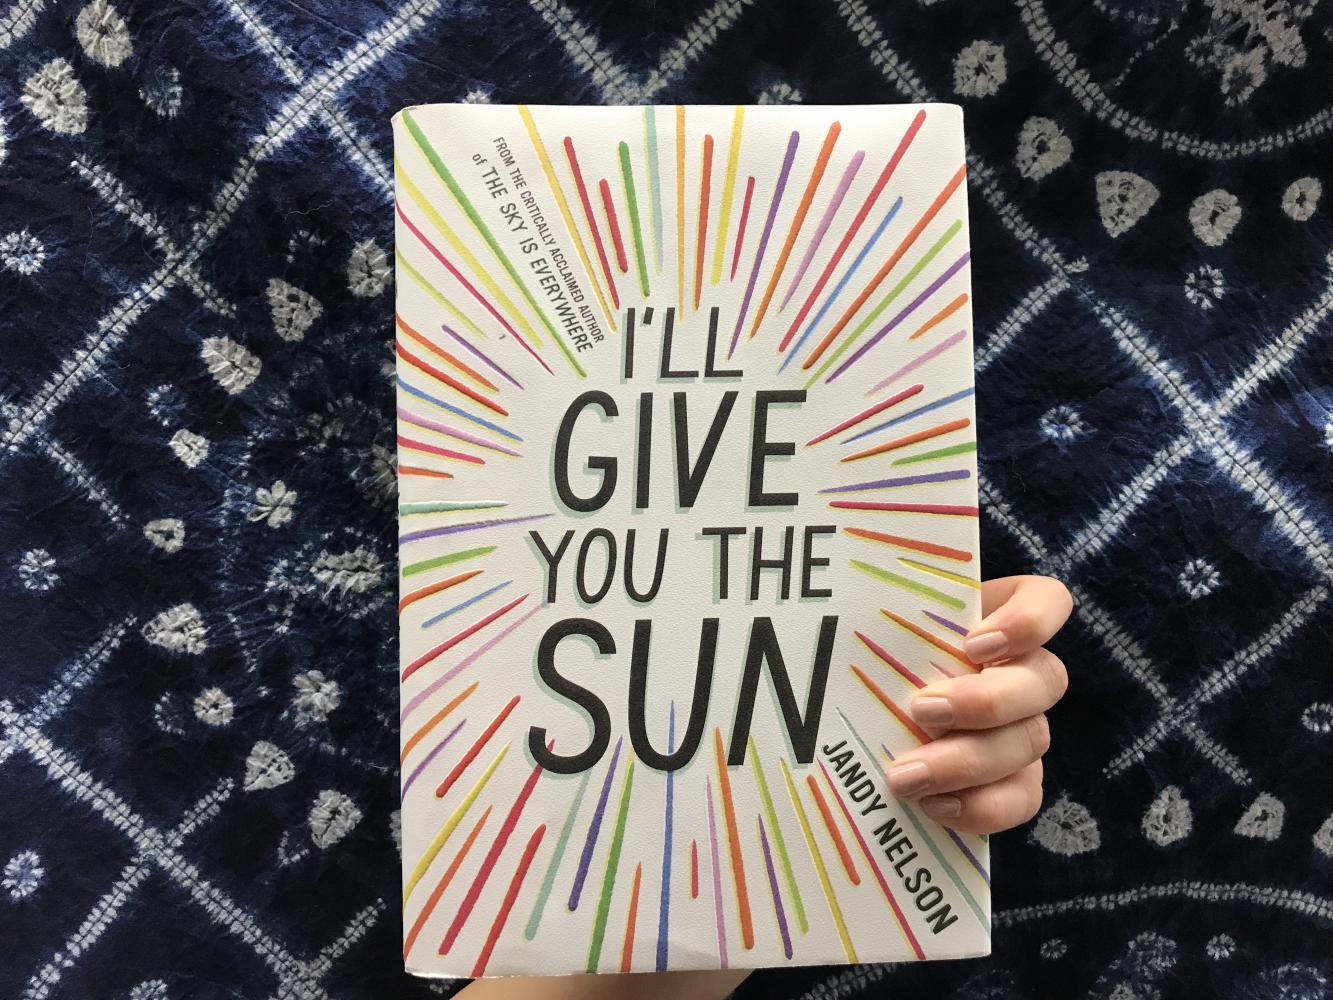 To See the Sun by Kelly Jensen